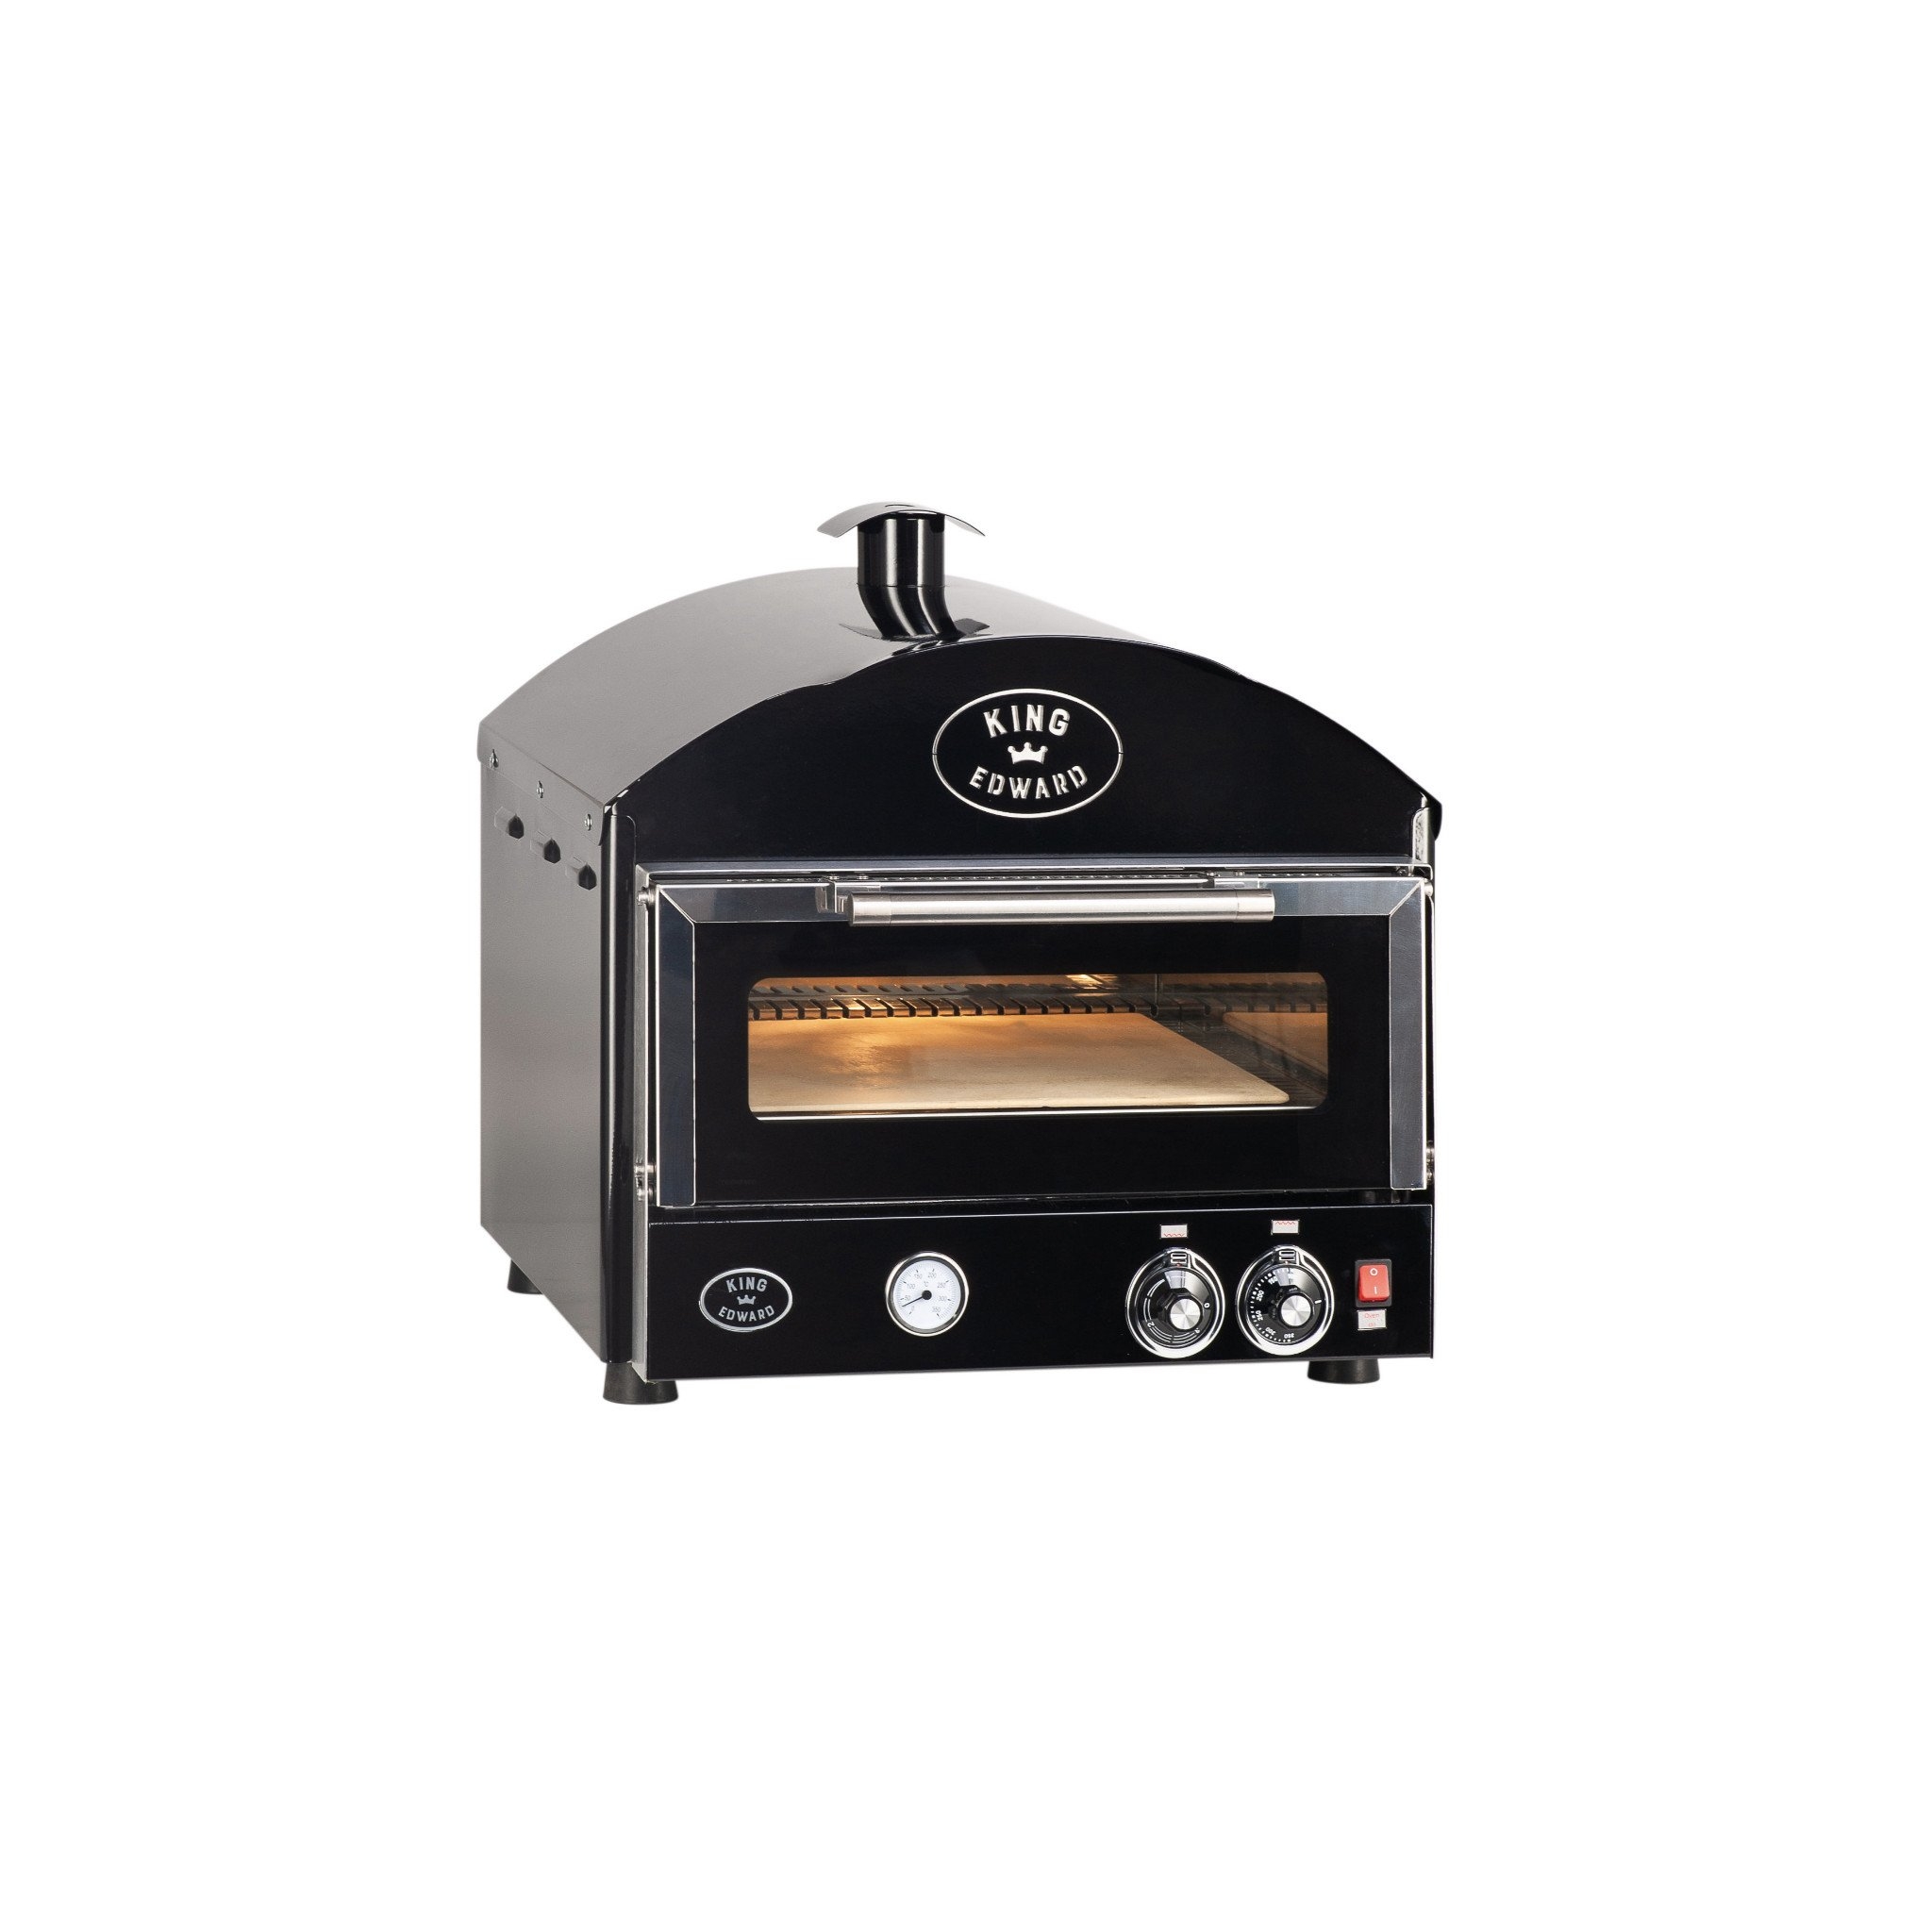 King Edward Stone-Baked Pizza King Oven – black – Outdoor Pizza Oven – Forno Boutique